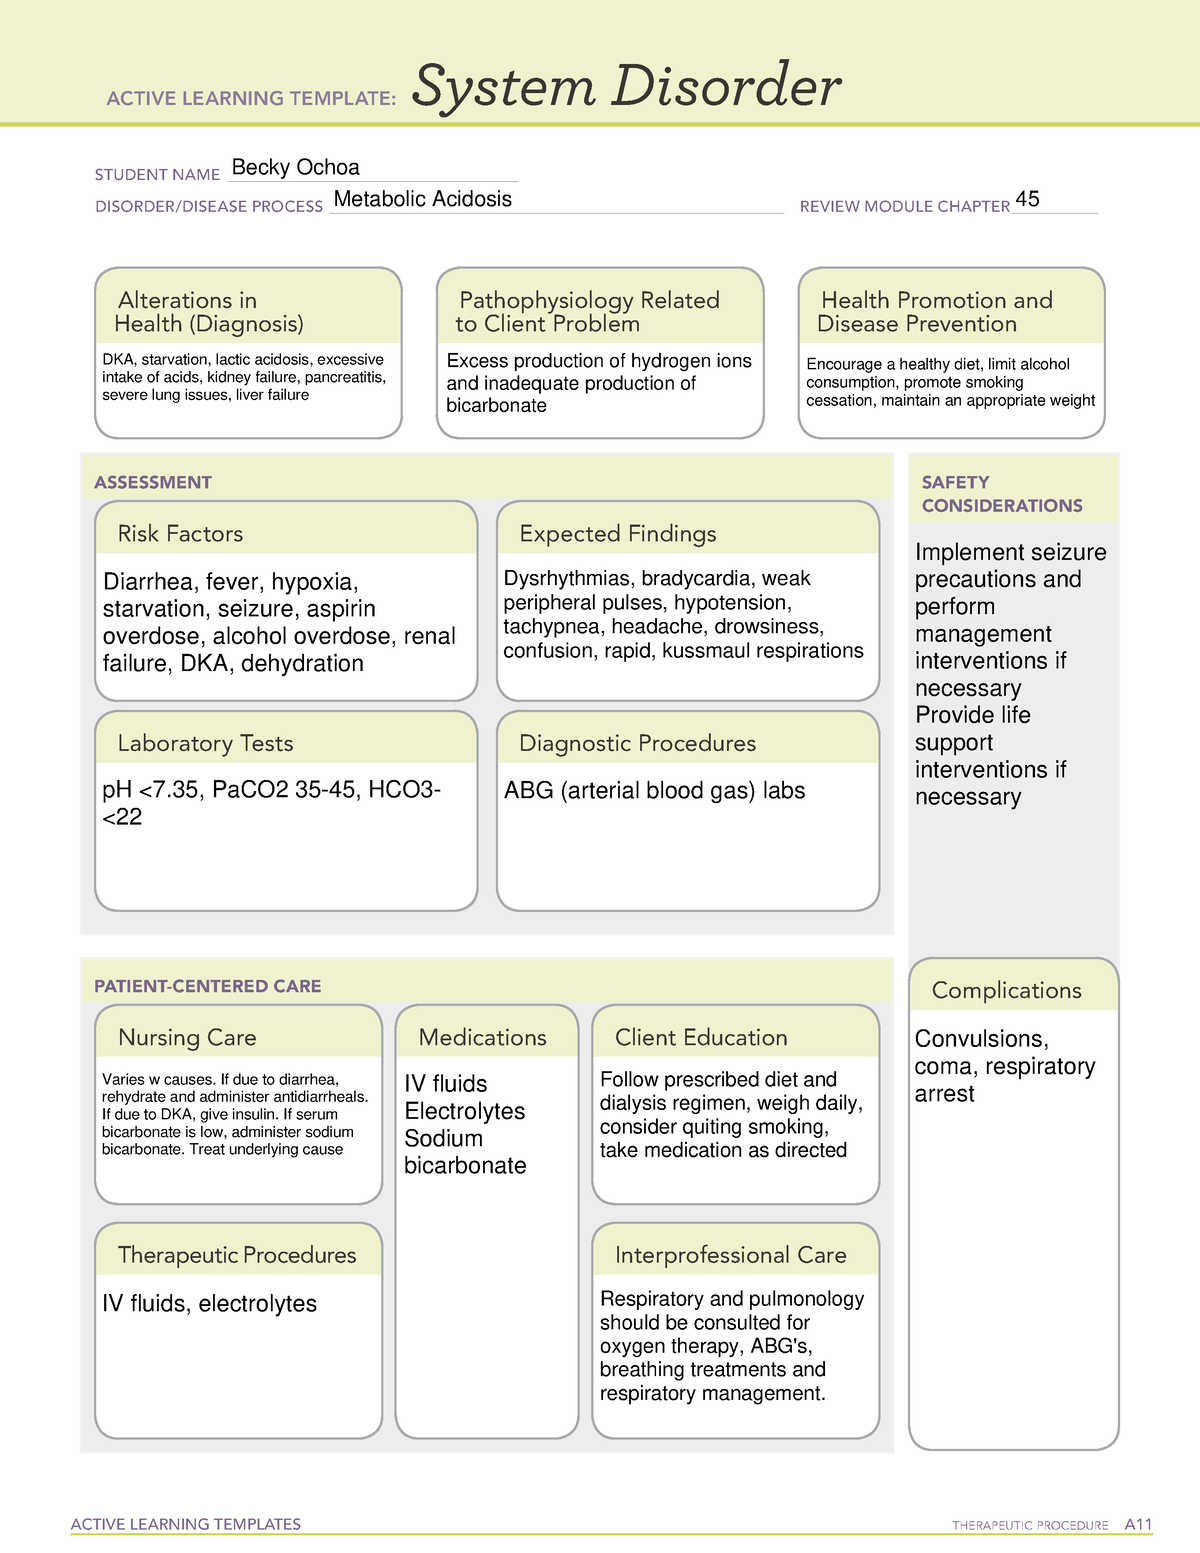 ATI template for Metabolic Acidosis ACTIVE LEARNING TEMPLATES